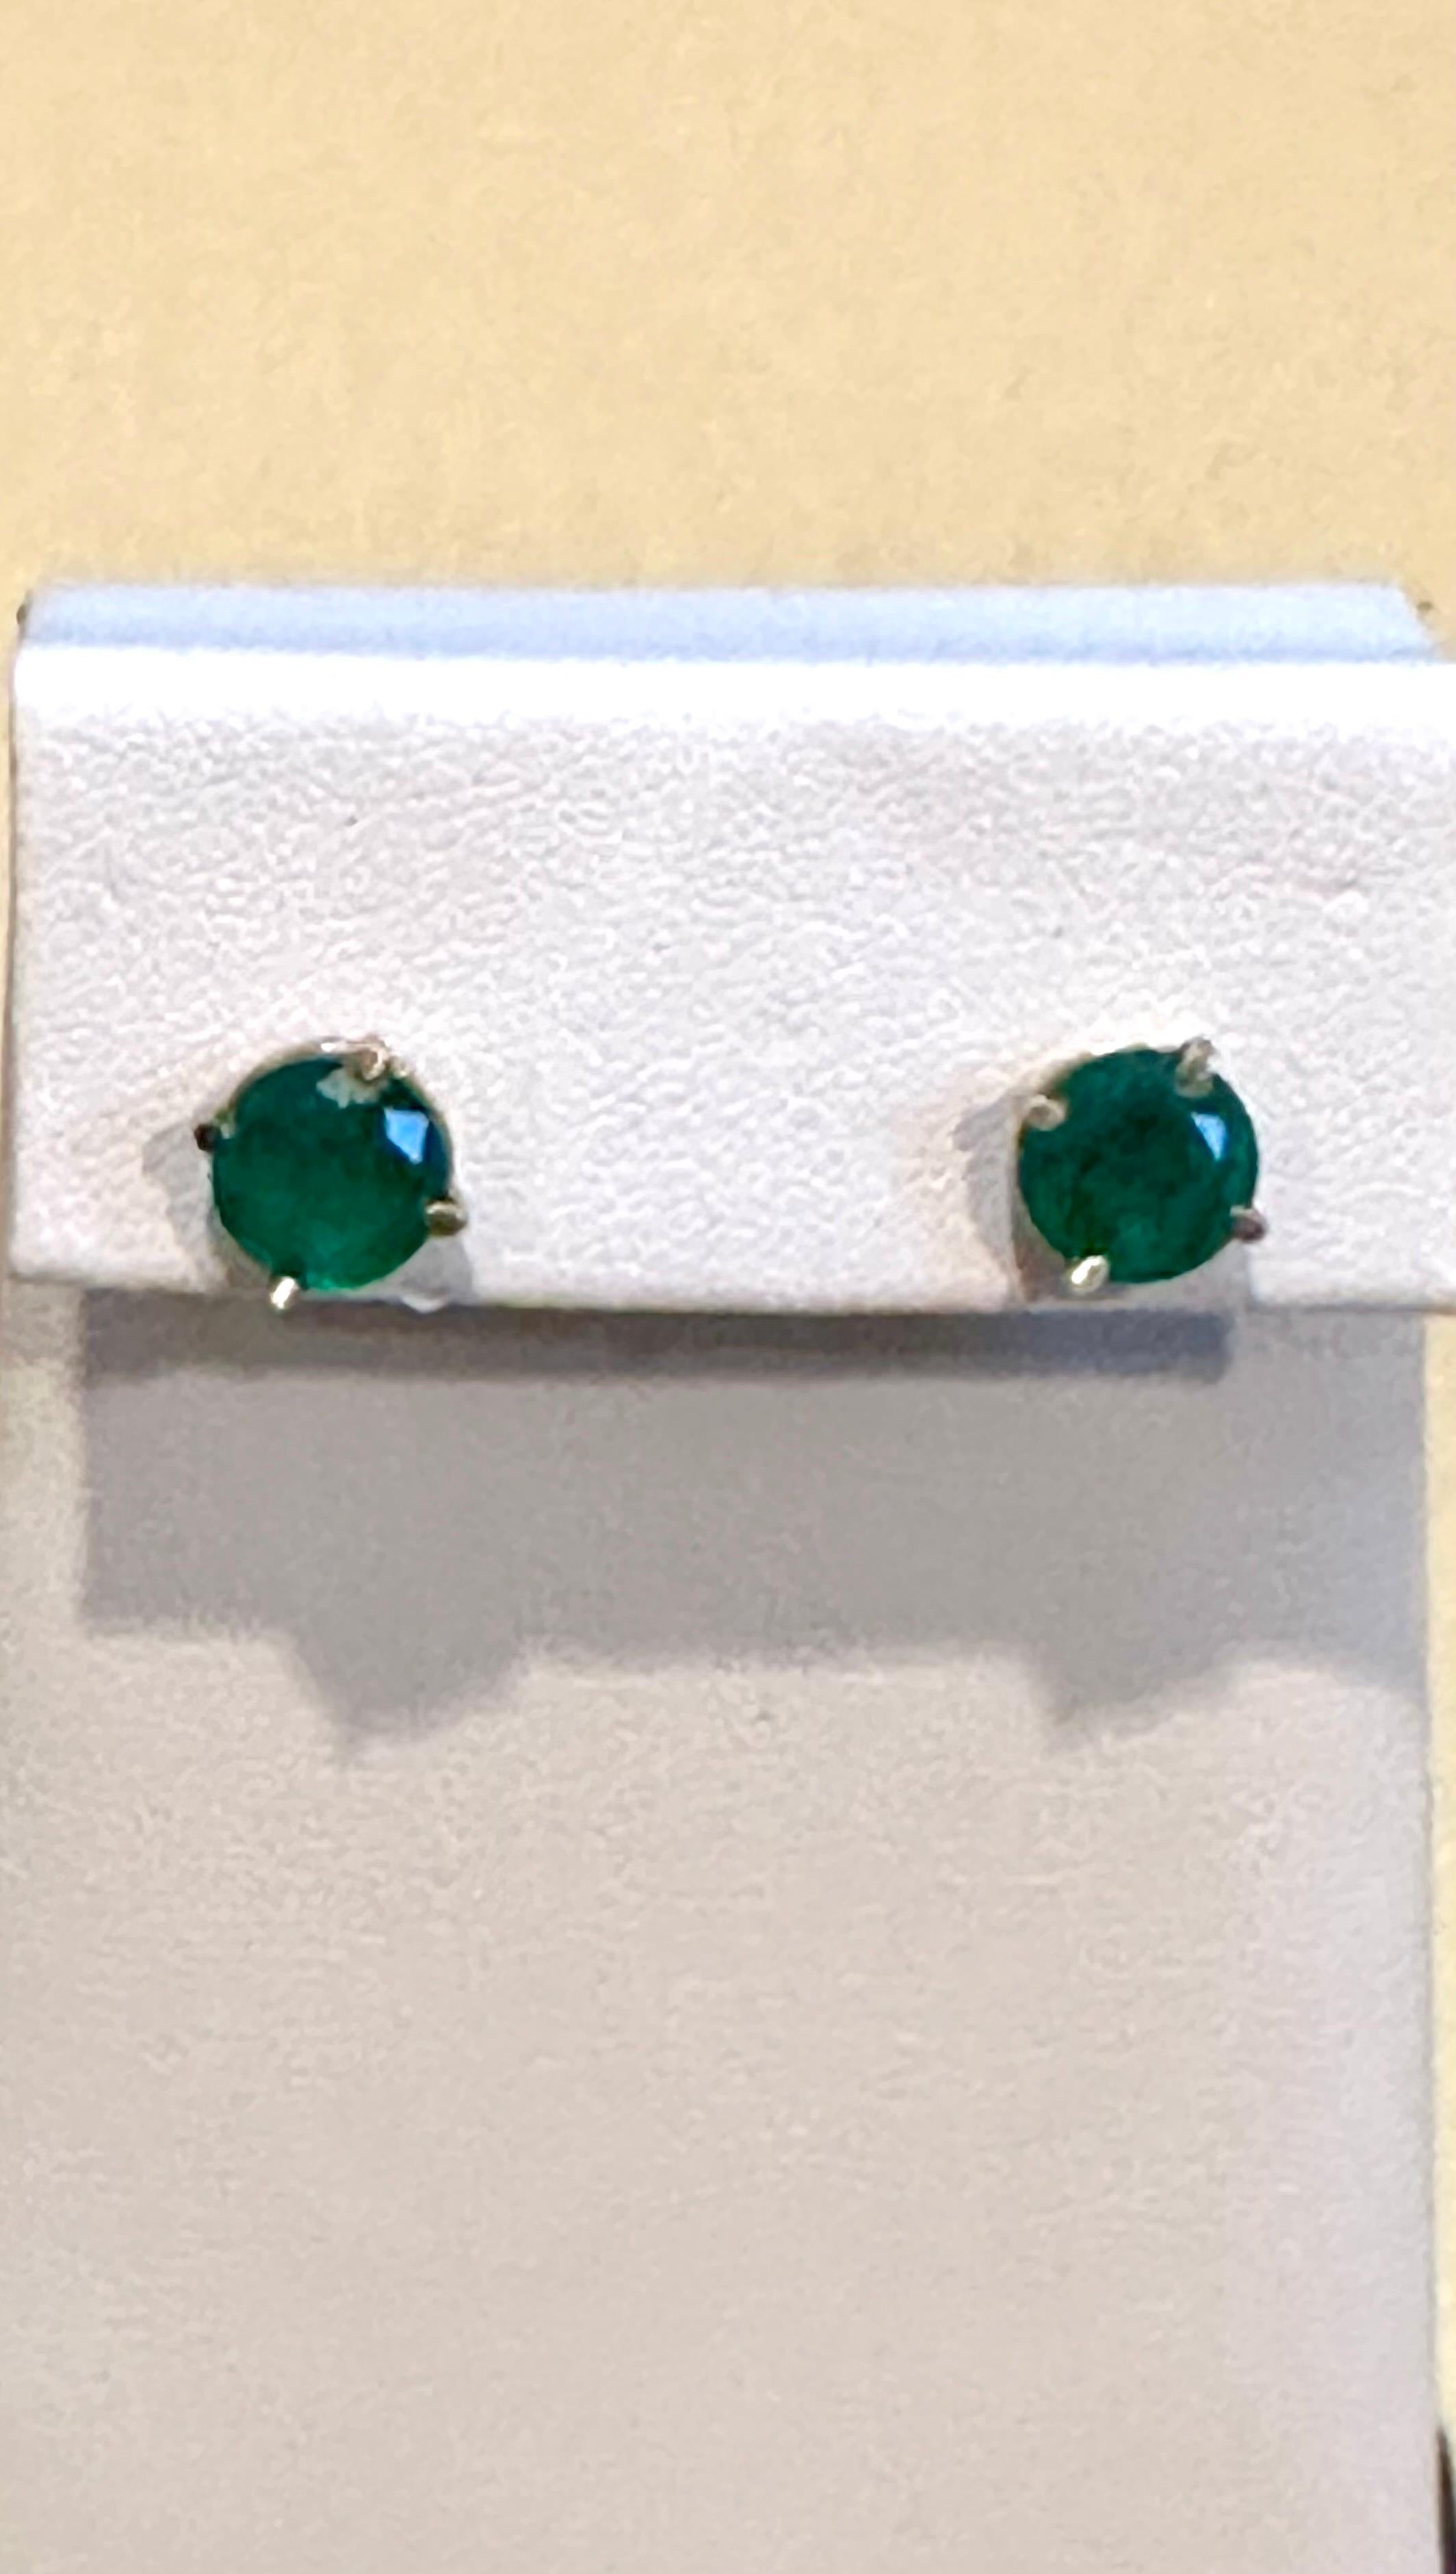 
Approximately 3.0 Carat 7.5 MM Round Natural Emerald Stud Post Earrings 14 Karat Yellow  Gold
Two emerald weighing  Approximately 3.0 Carats Total
Each Emerald is 1.5 ct
These are 7 MM Rounds
New Earrings
This exquisite pair of earrings are